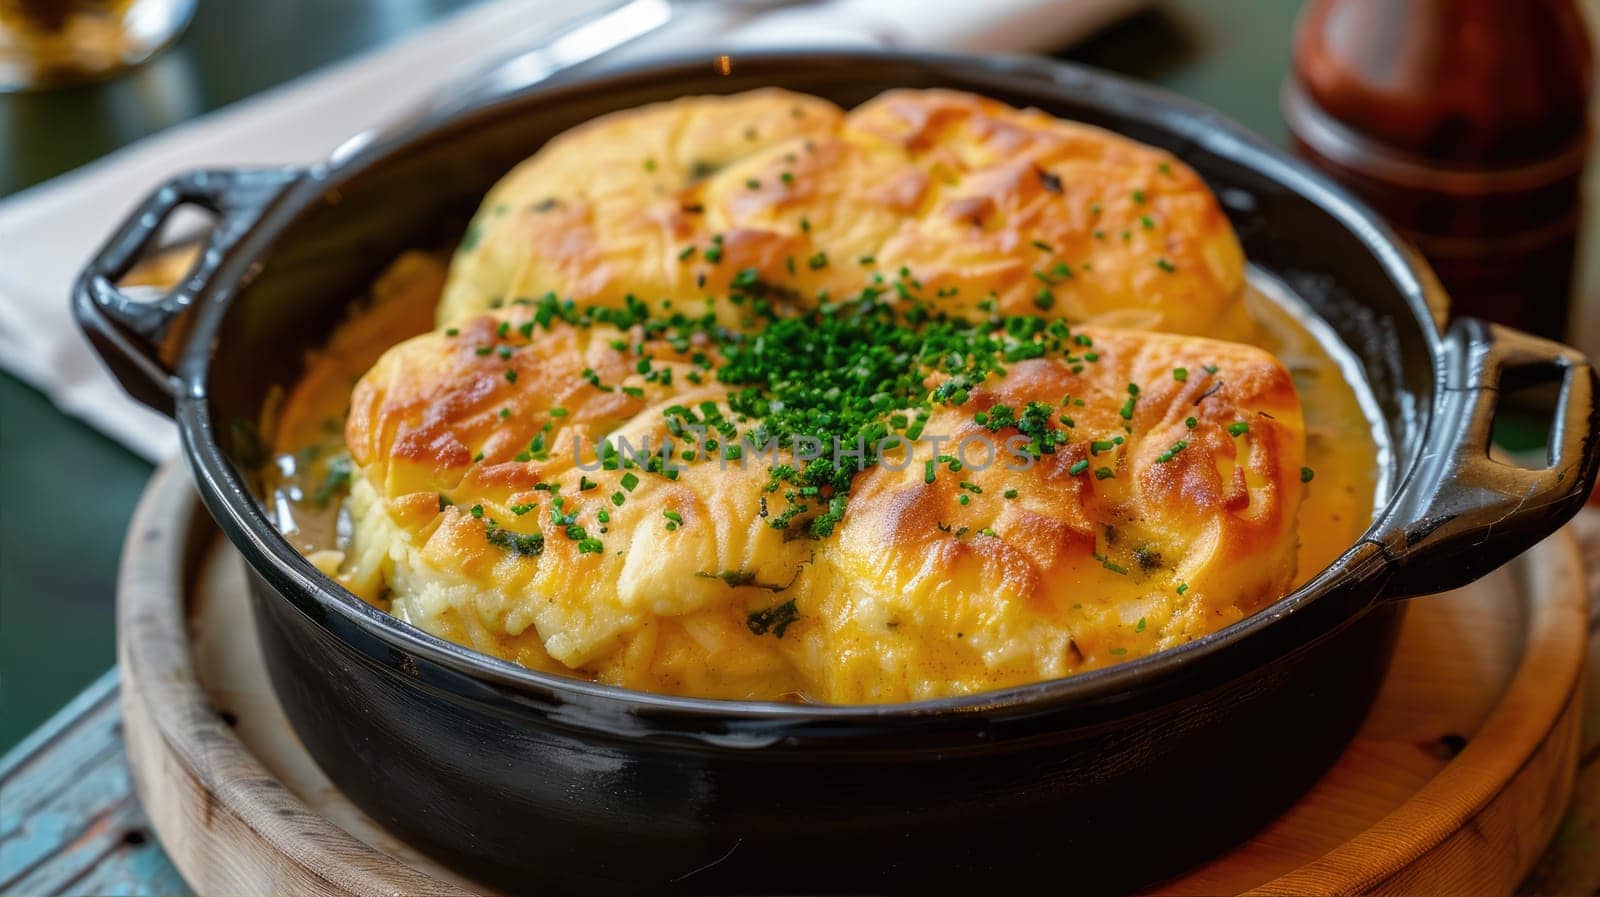 A skillet filled with a savory casserole, creating a delicious and comforting dish perfect for any meal time AI